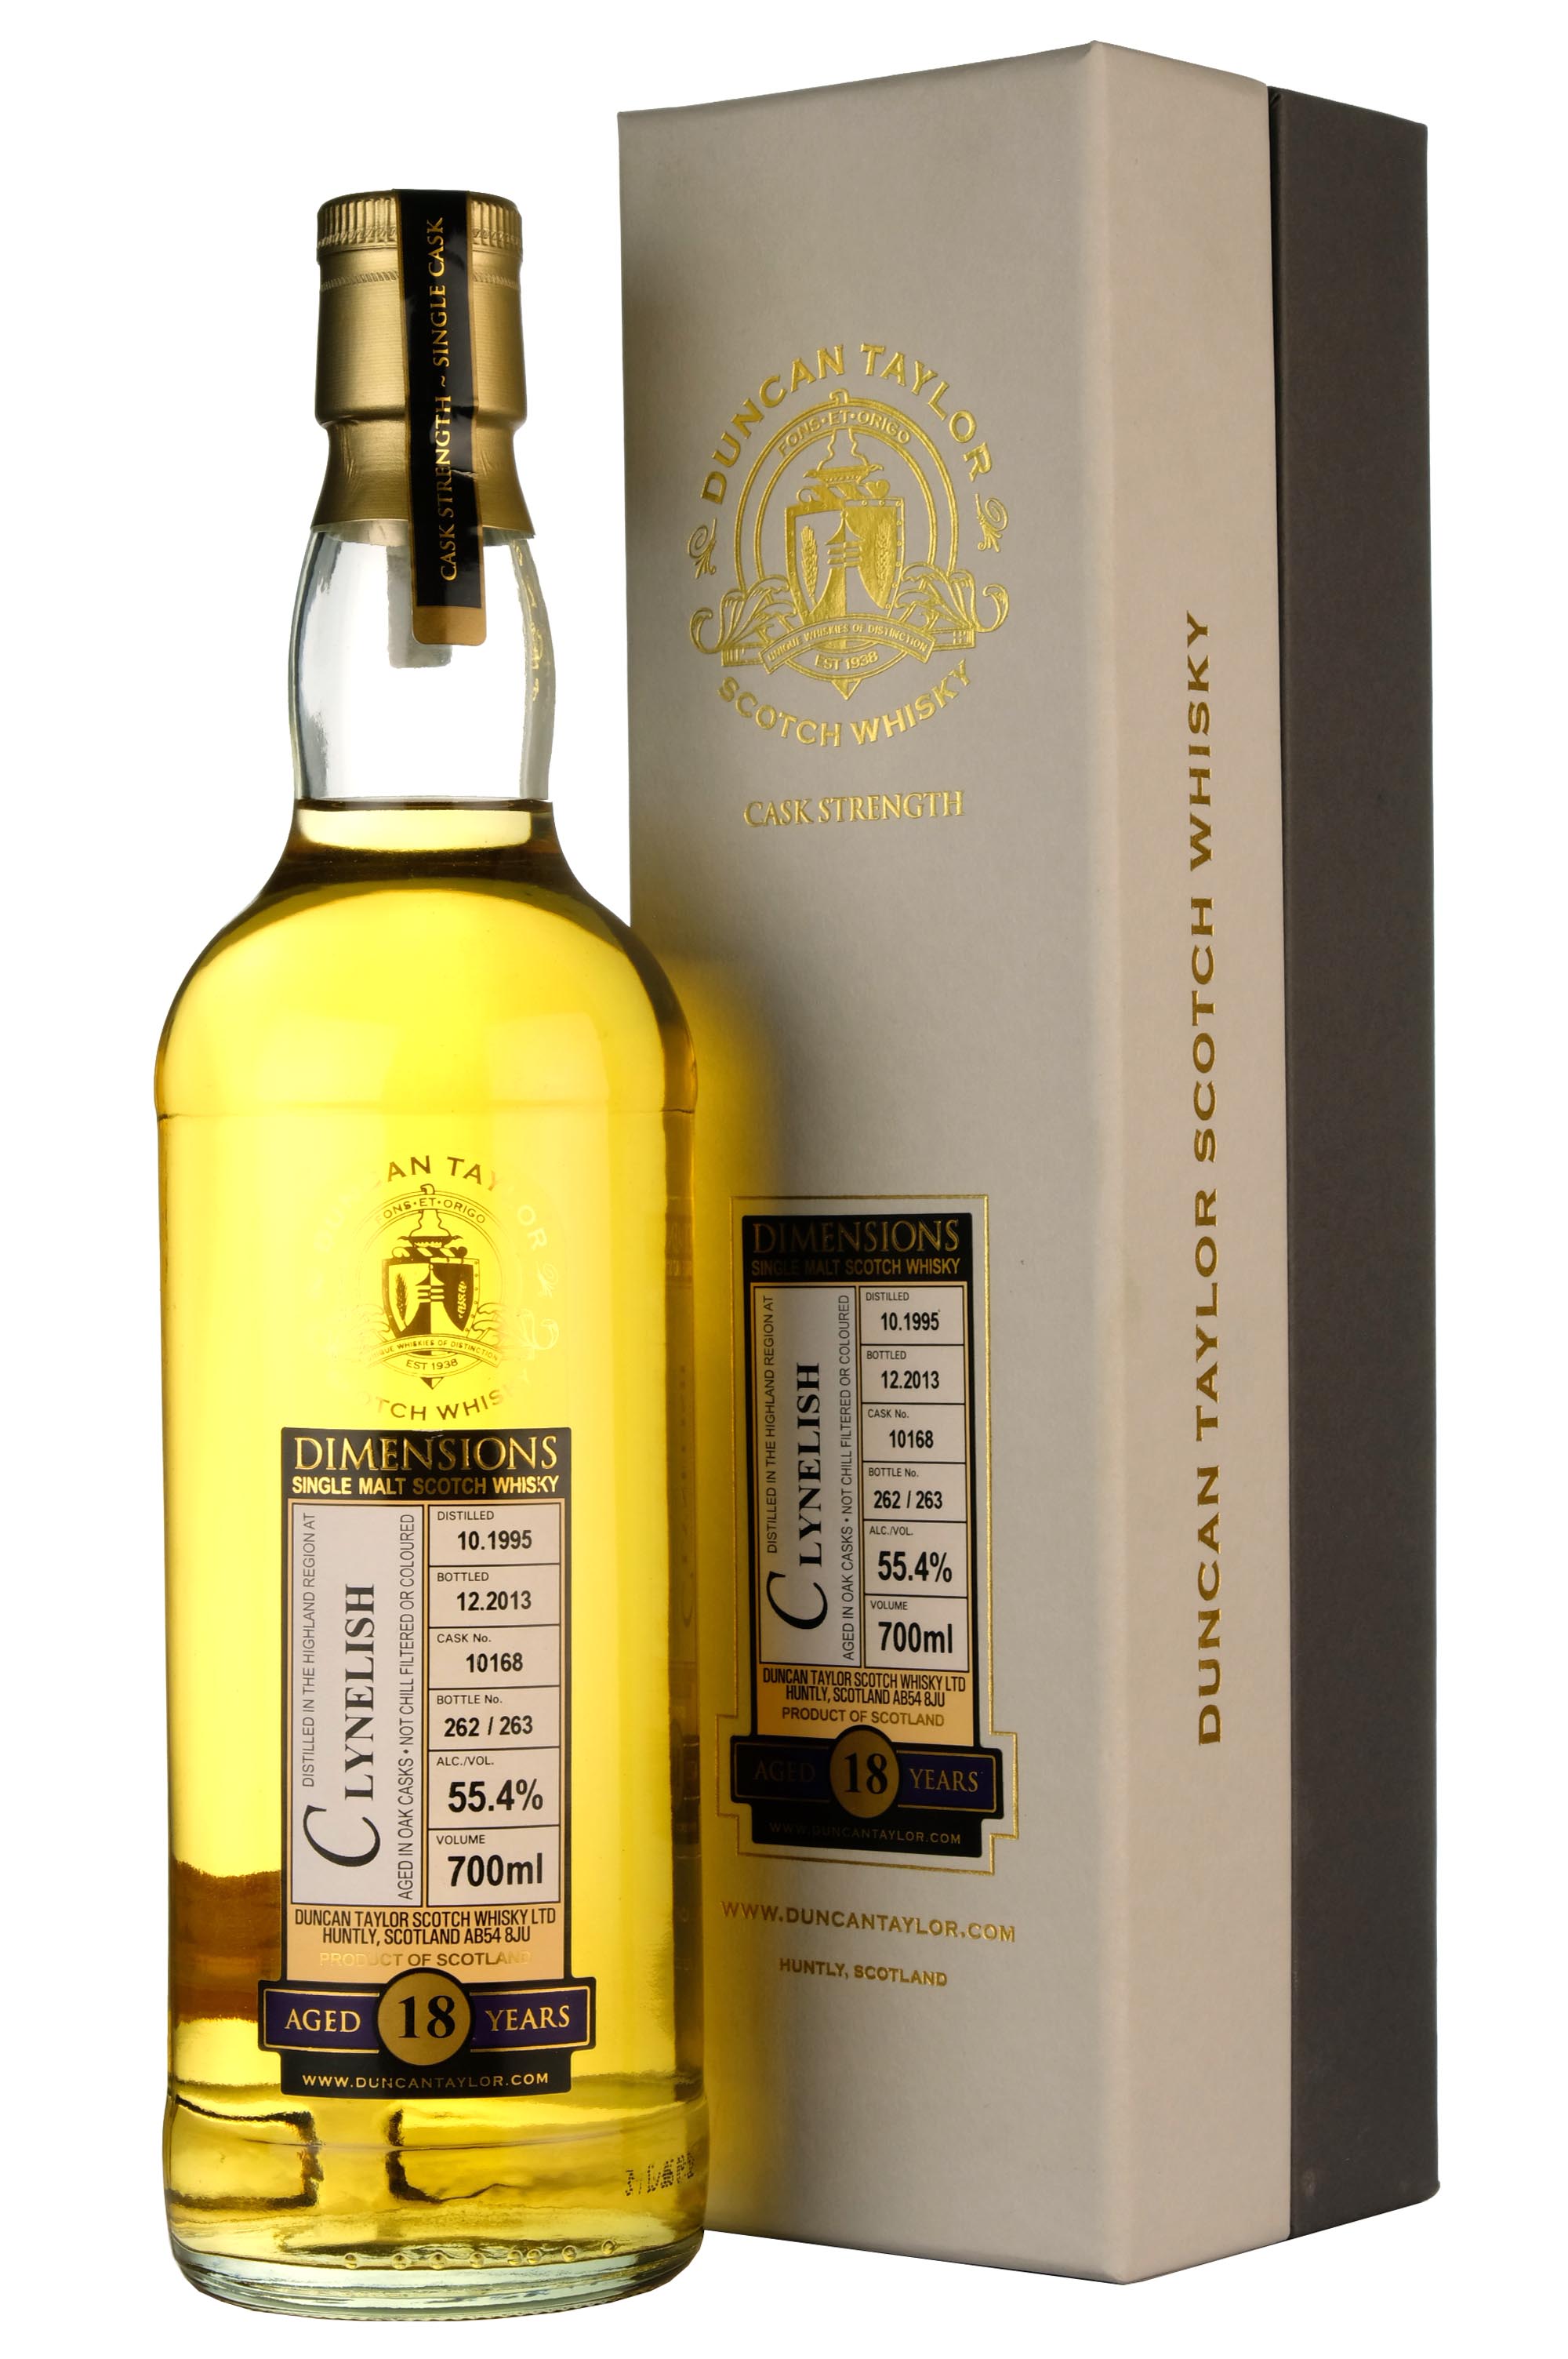 Clynelish 1995-2013 | 18 Year Old Duncan Taylor Dimensions Single Cask 10168